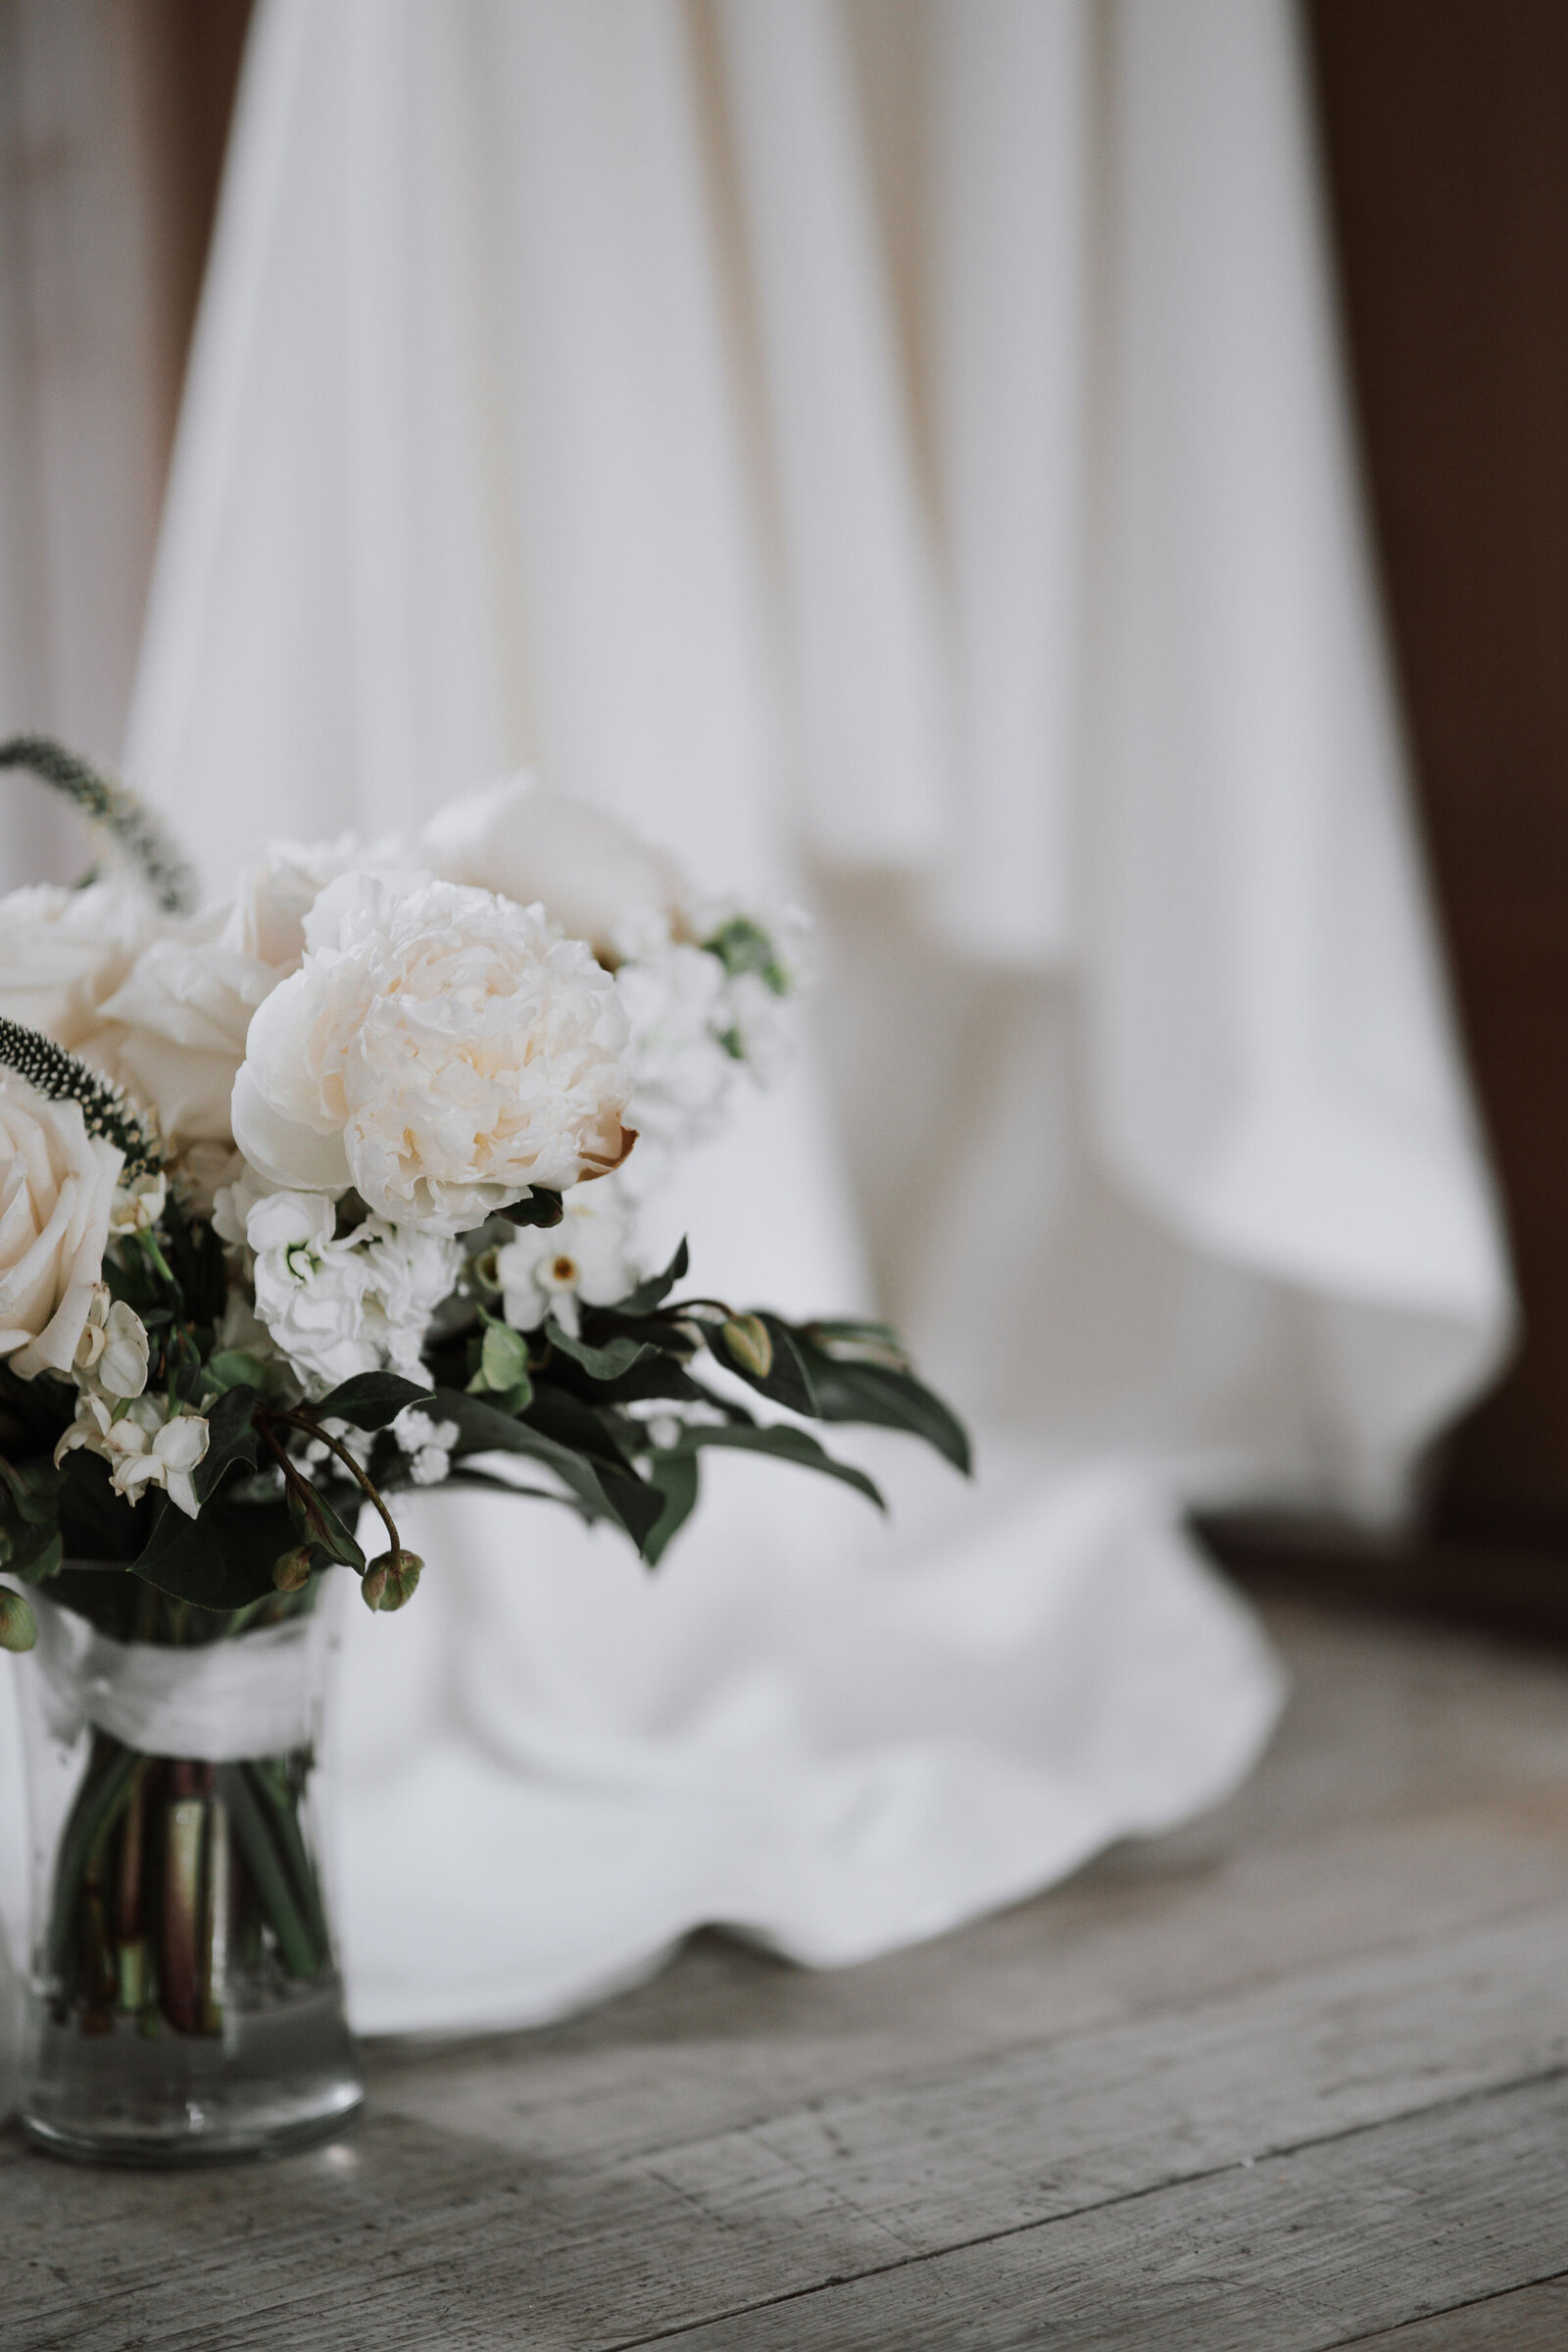 in the foreground the bridal bouquet shows off white roses wrapped with ribbon insode a vase in the background the  white wedding dress flows captured by Idaho Falls Wedding Photographer